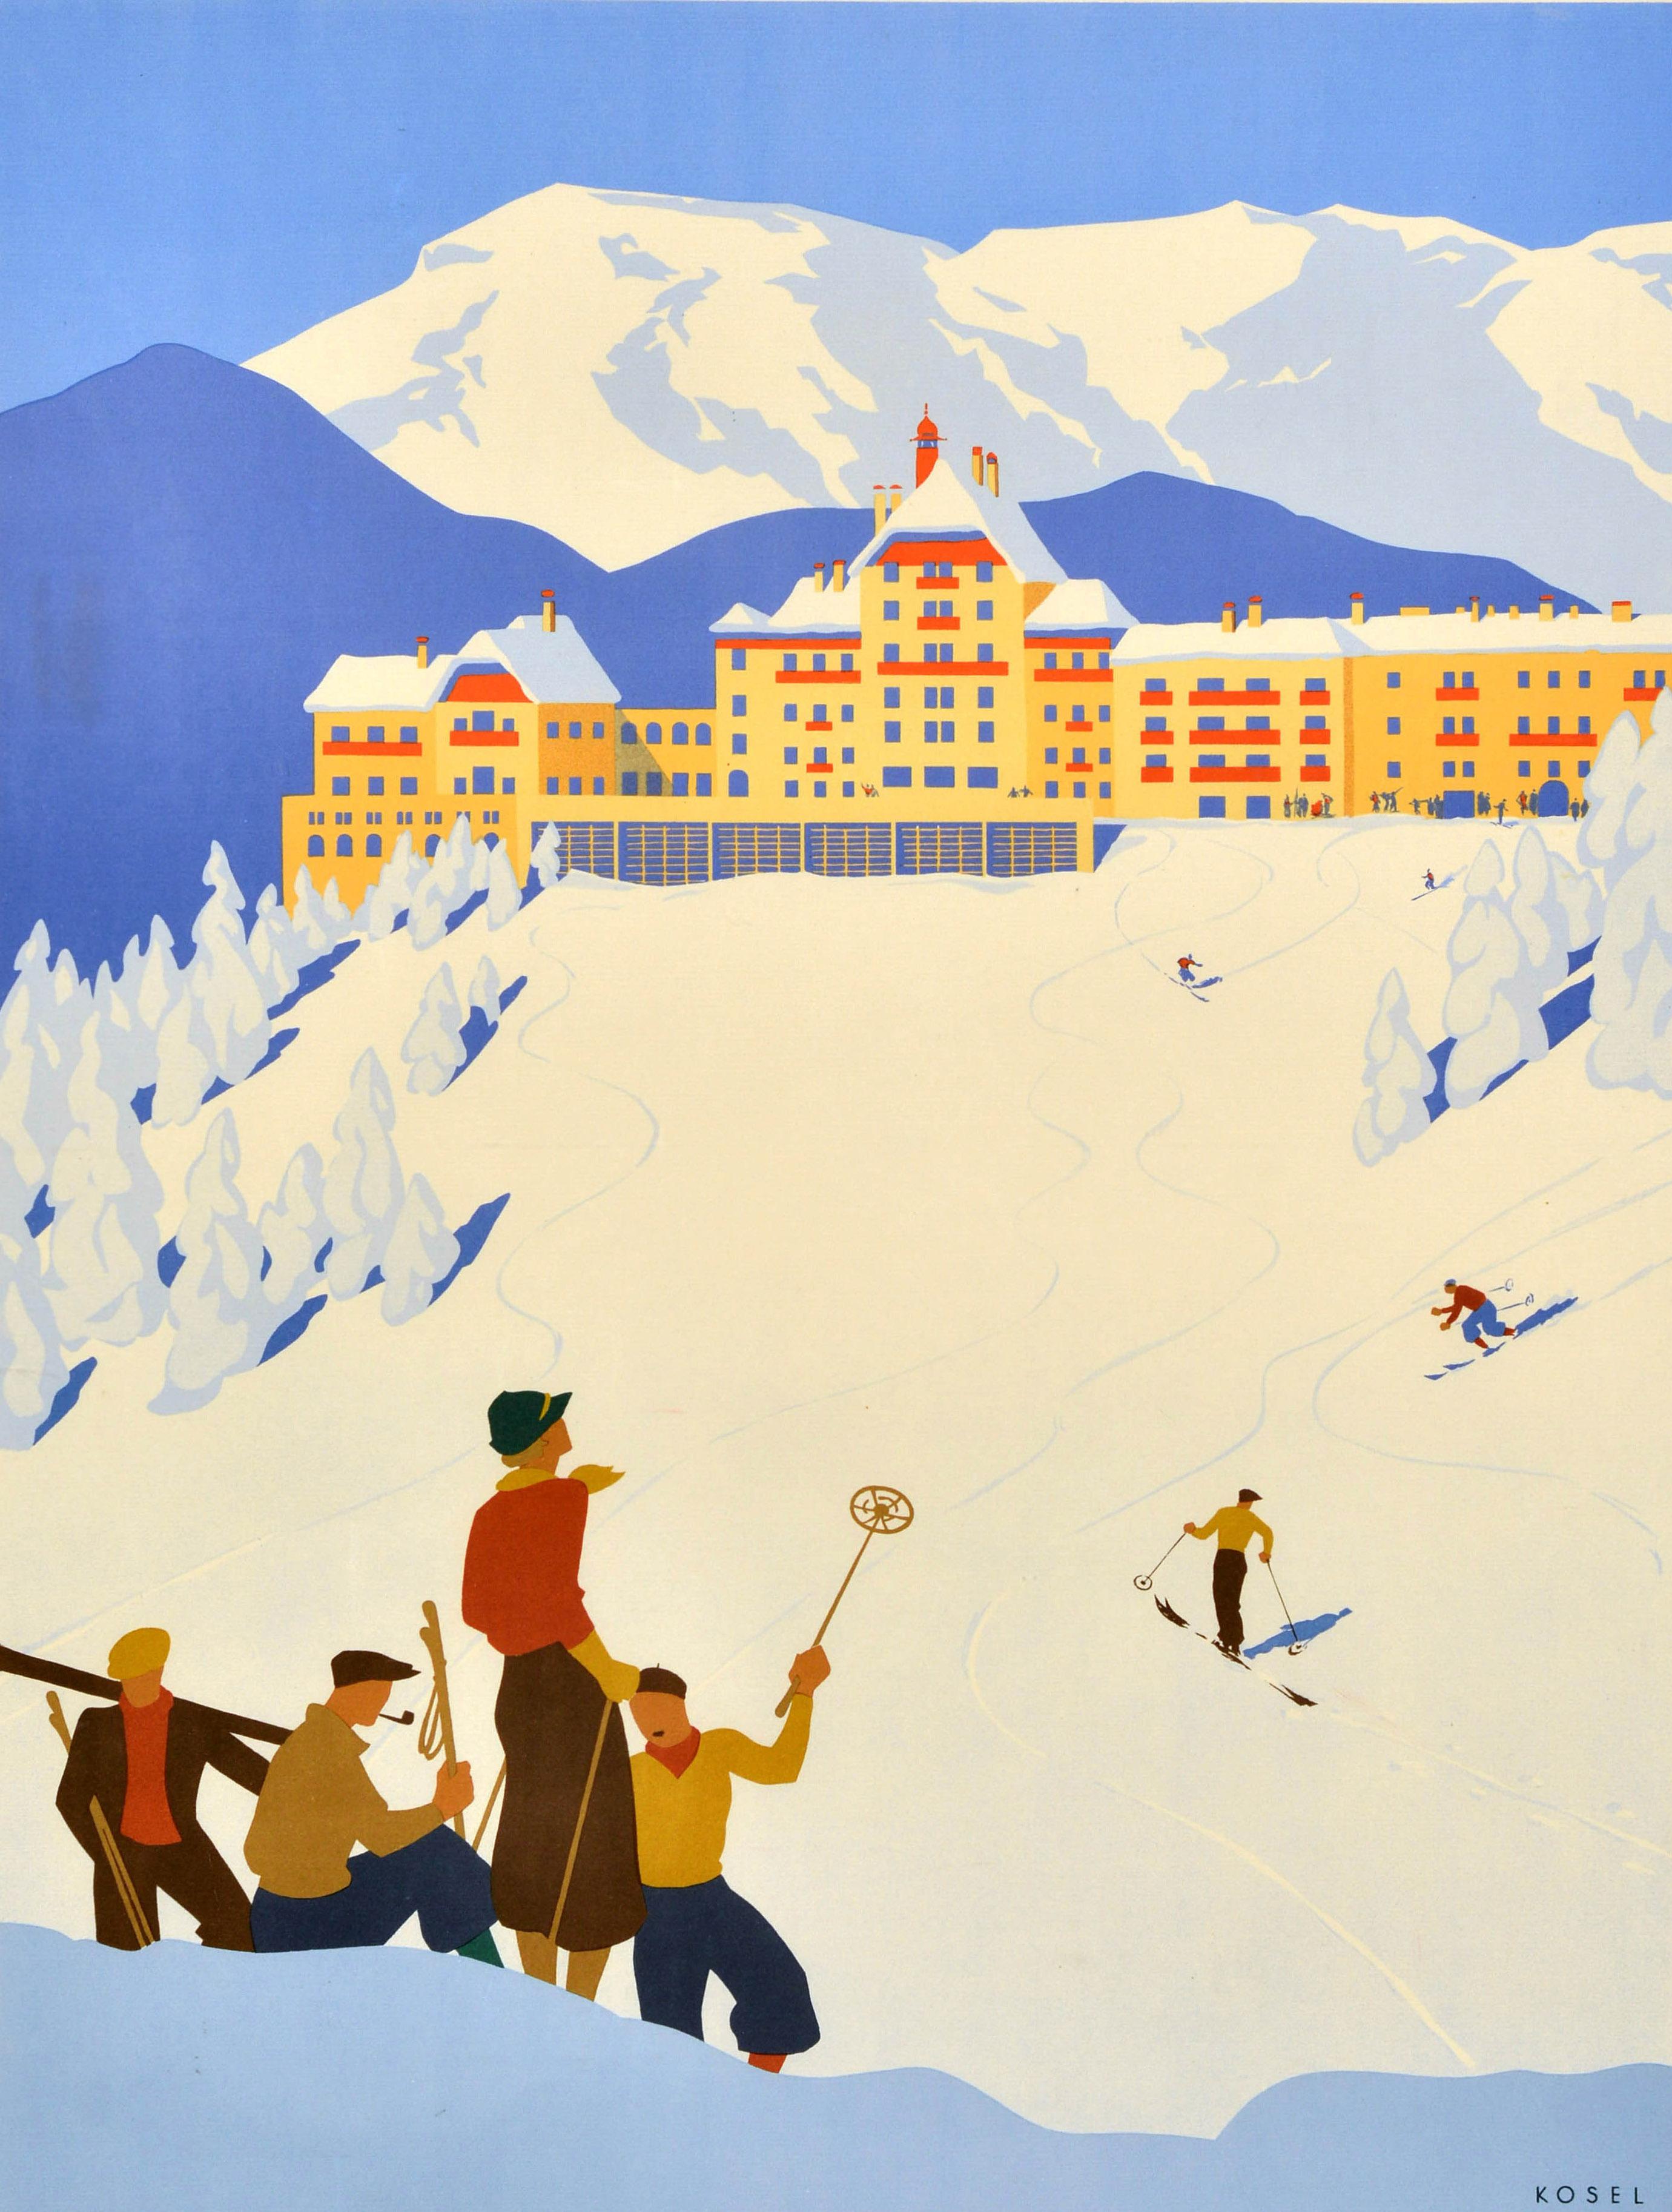 Original vintage travel advertising poster for the Sudbahnhotel in Semmering featuring a great Art Deco style image of people skiing down the slopes in front of the imposing grand hotel with snowy mountains on the horizon and snow-topped trees on